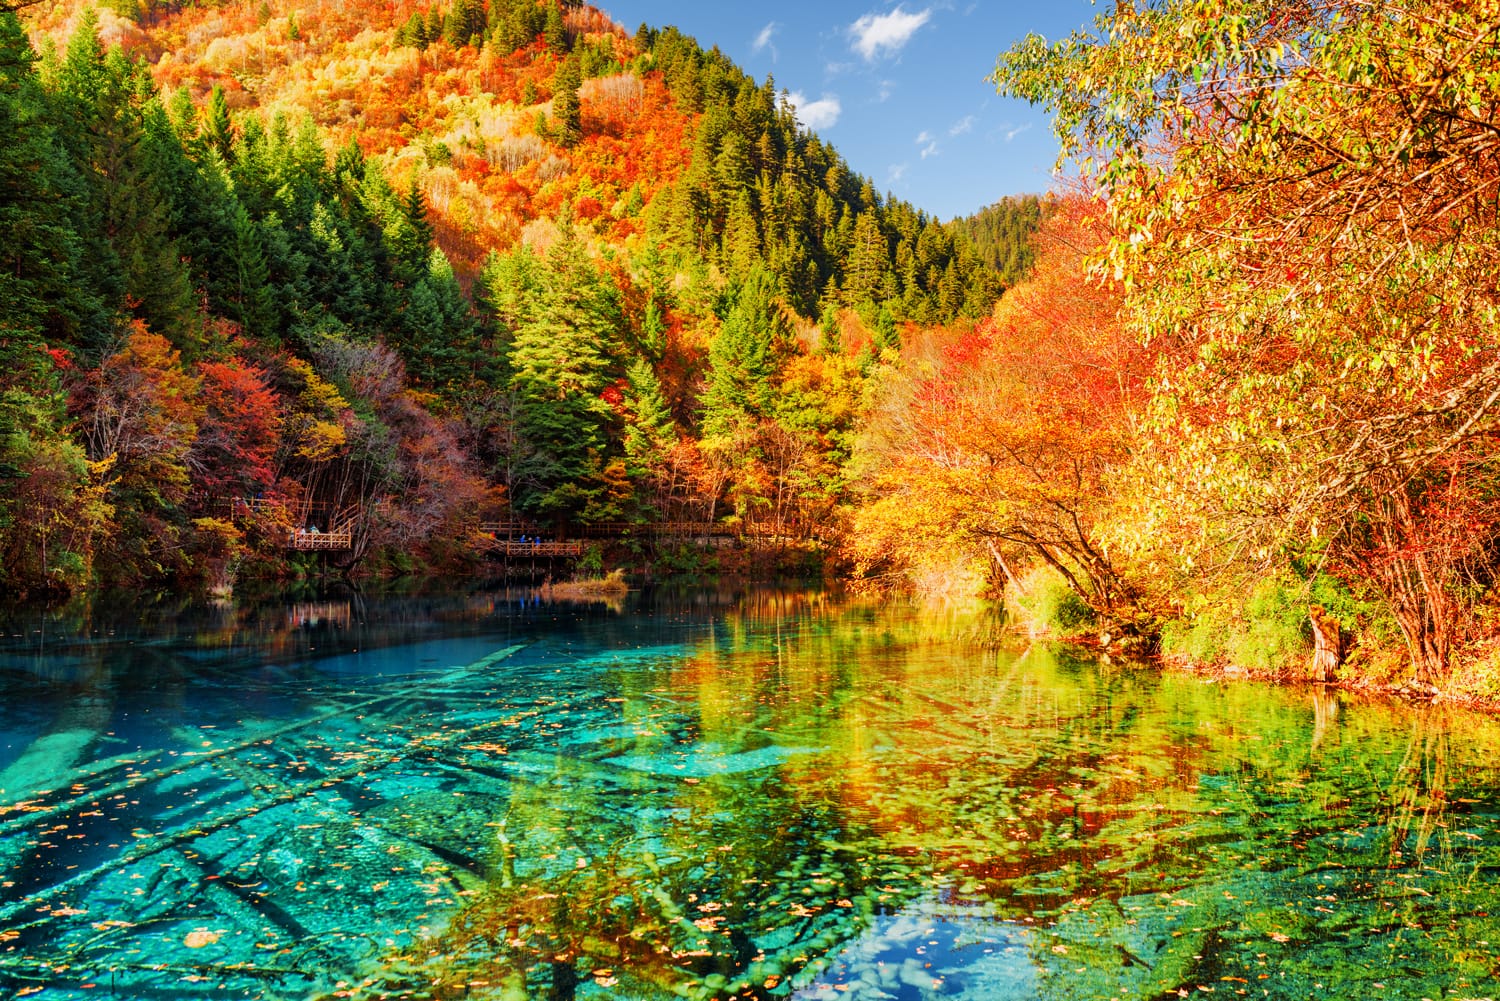 Amazing view of the Five Flower Lake (Multicolored Lake) among colorful fall woods in Jiuzhaigou nature reserve, China